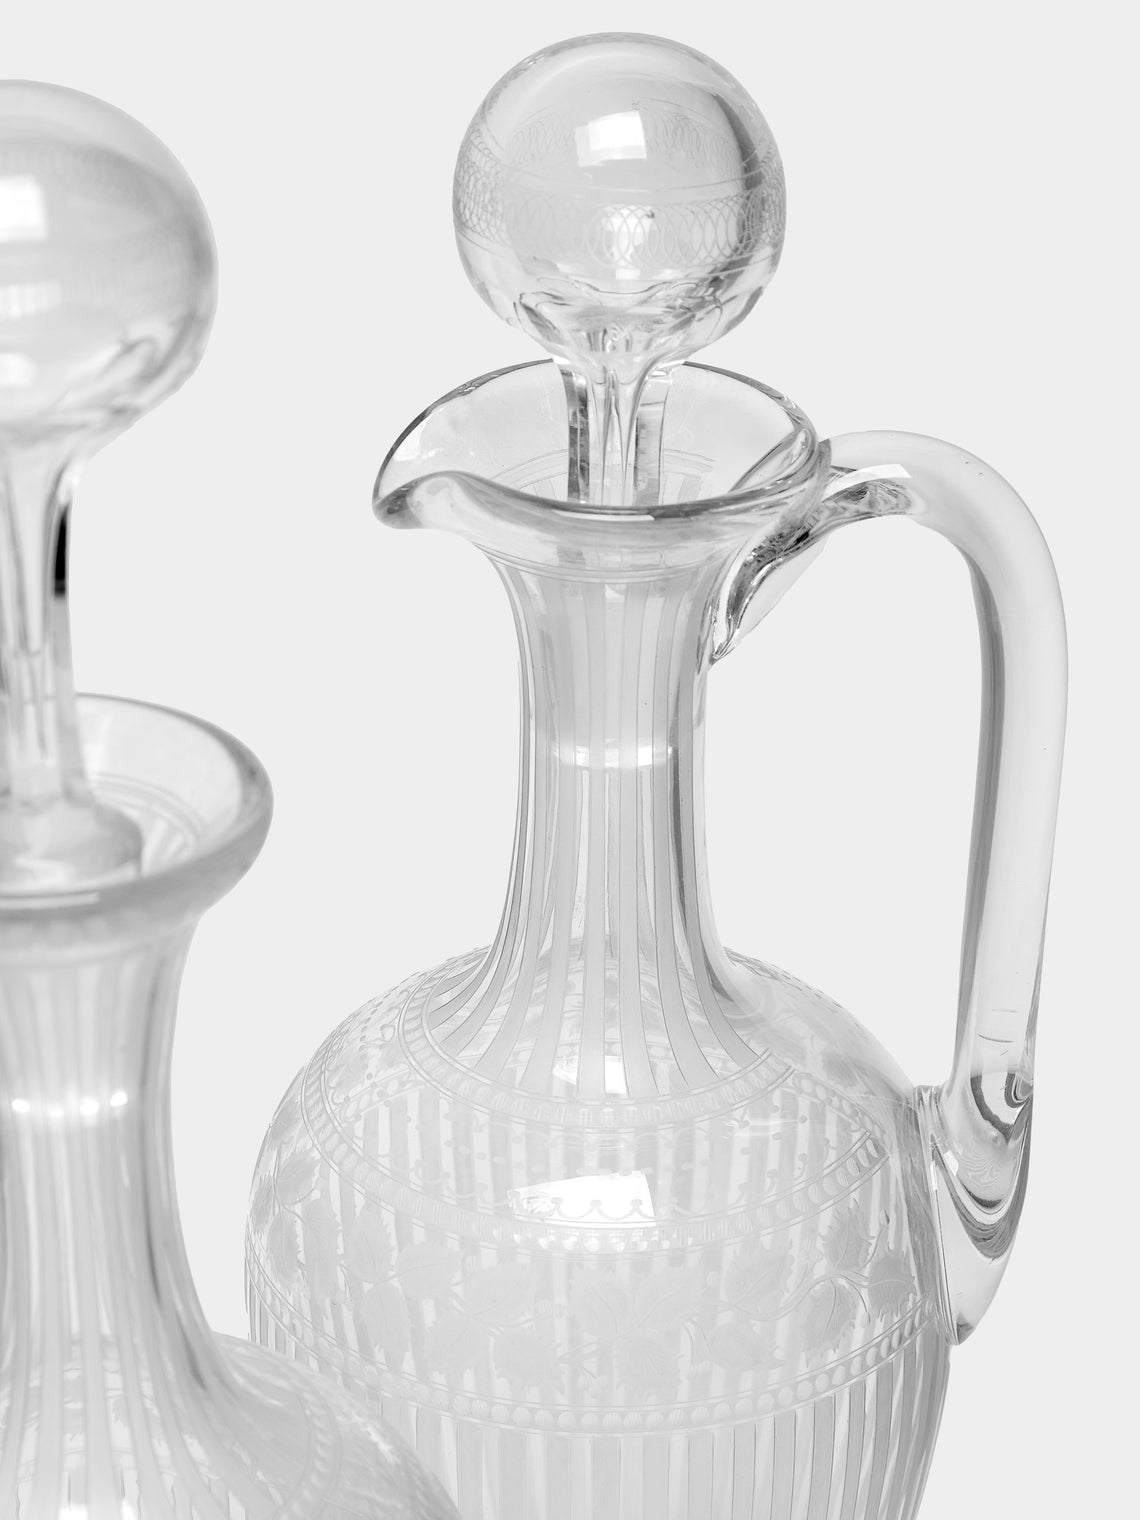 Antique and Vintage - 1860s Hand-Etched Glass Wine Decanters (Set of 2) -  - ABASK